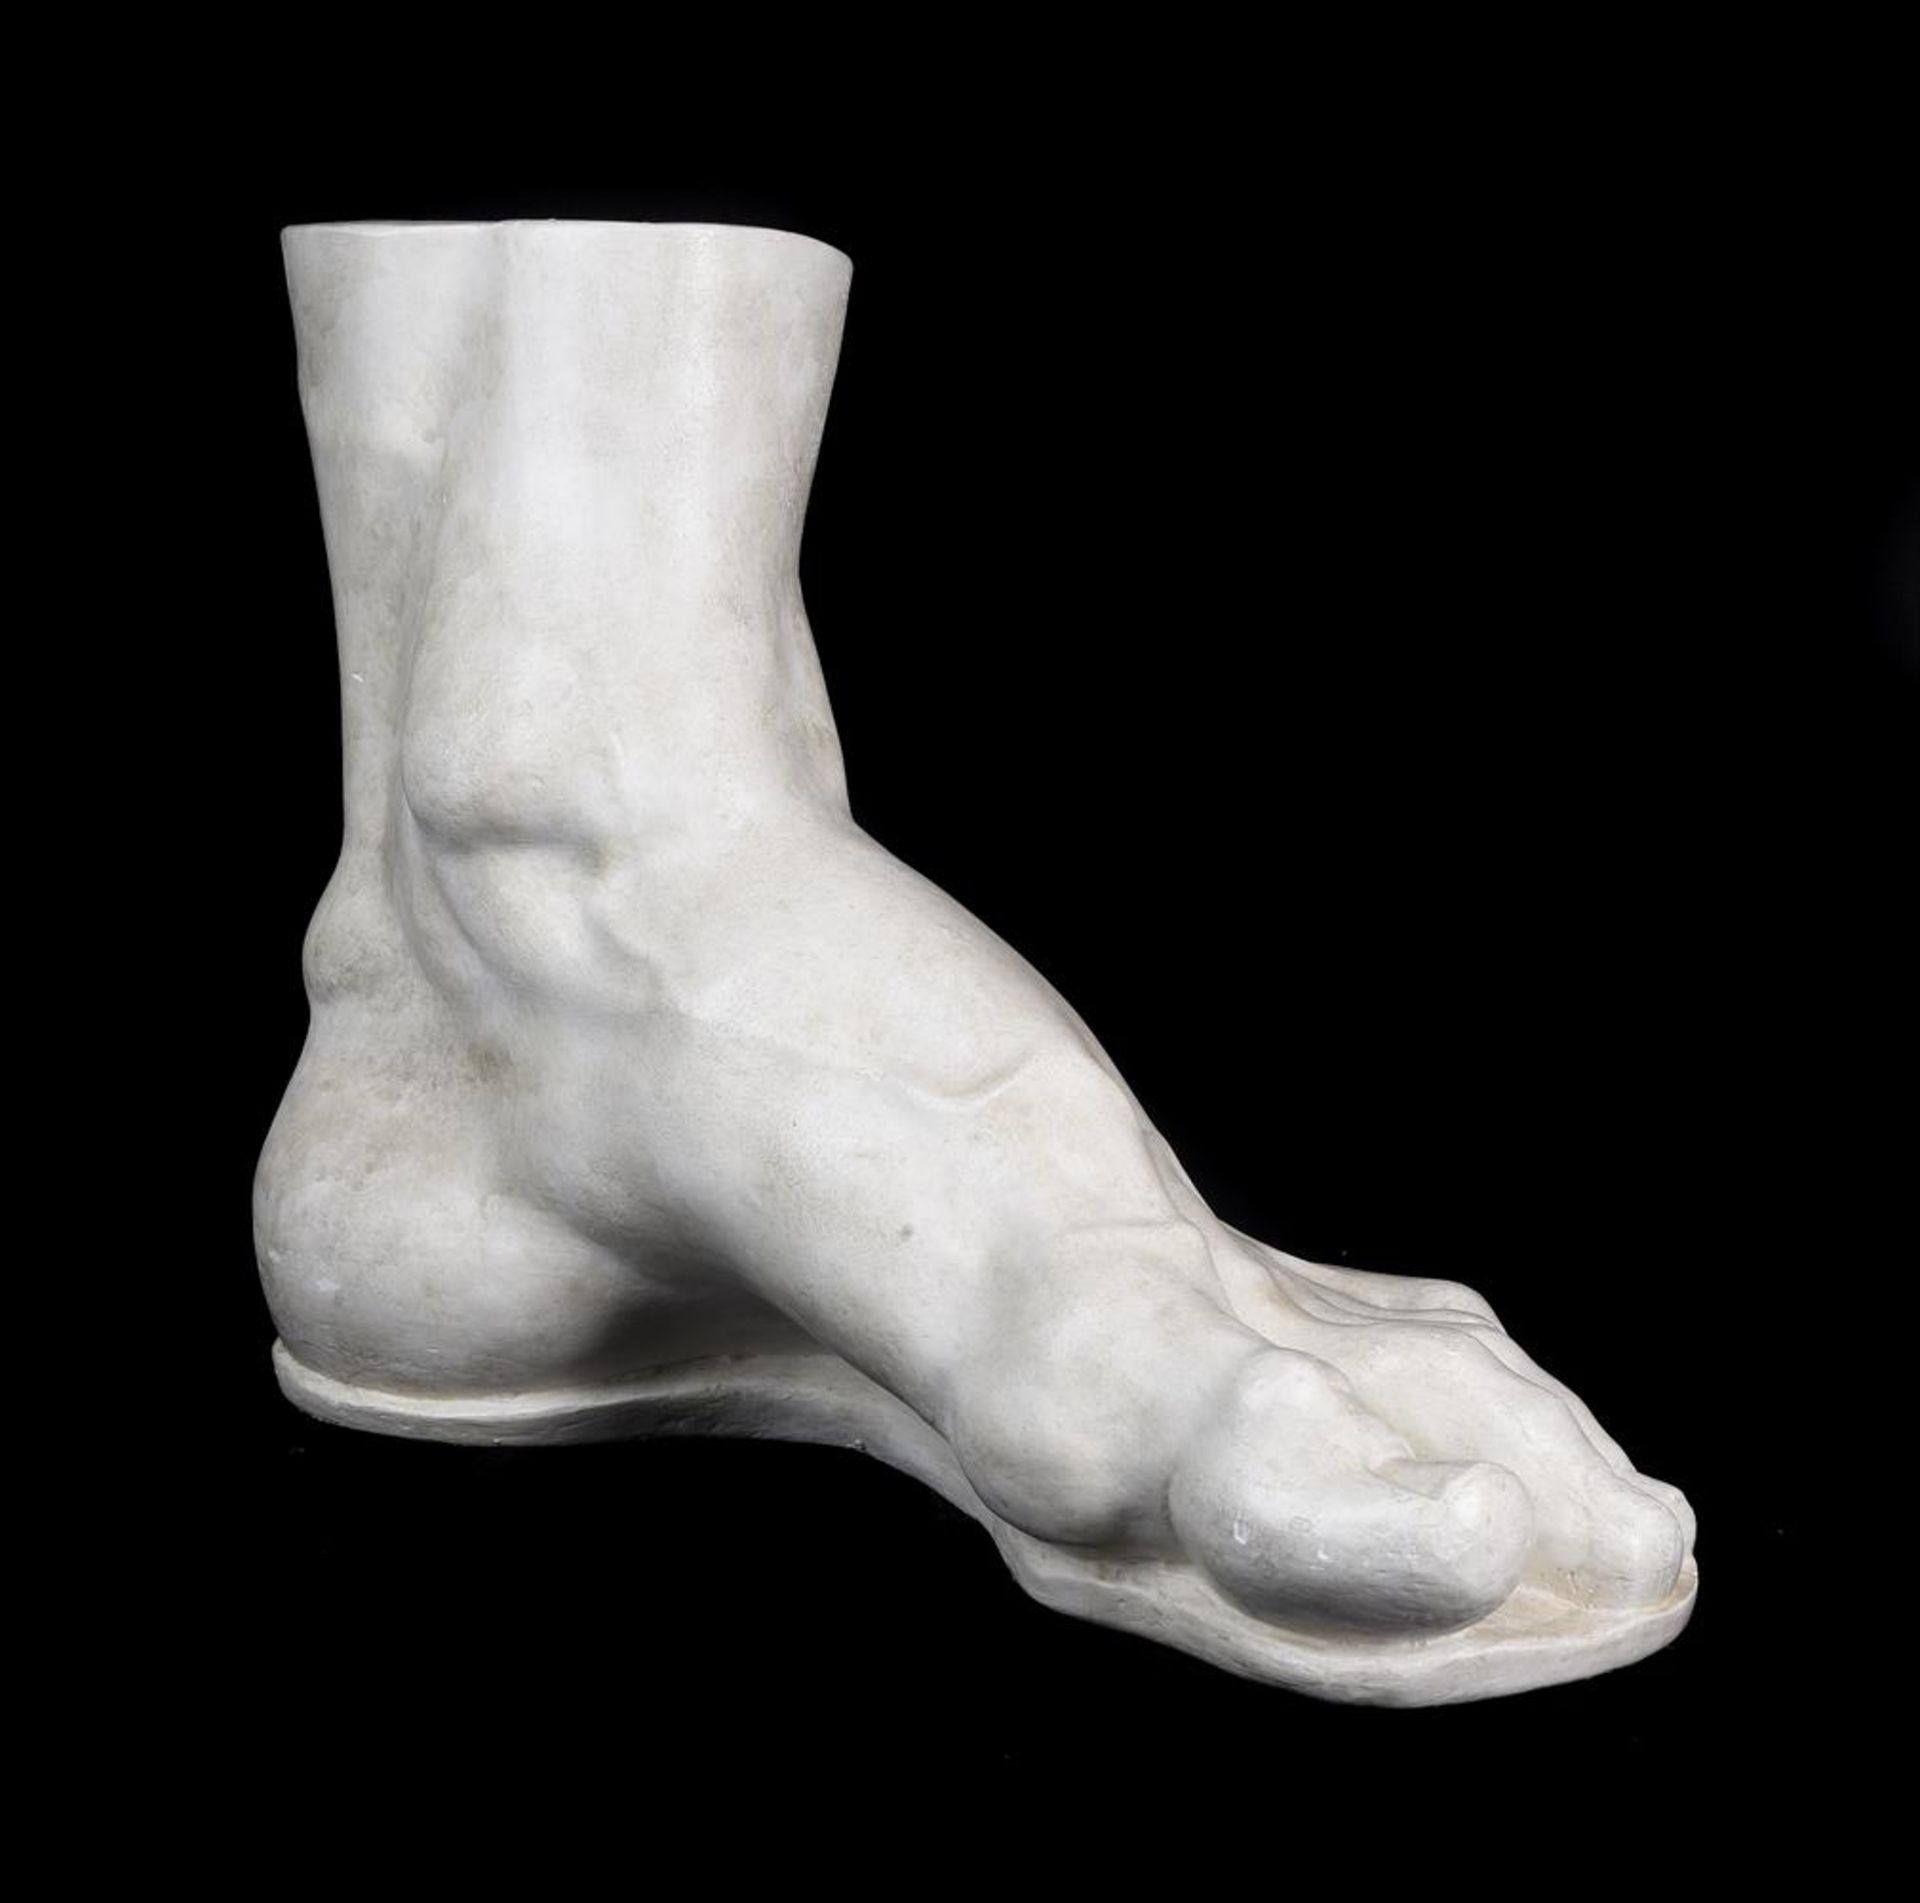 AFTER MICHELANGELO, A PLASTER MODEL OF THE FOOT OF DAVID - Image 2 of 2